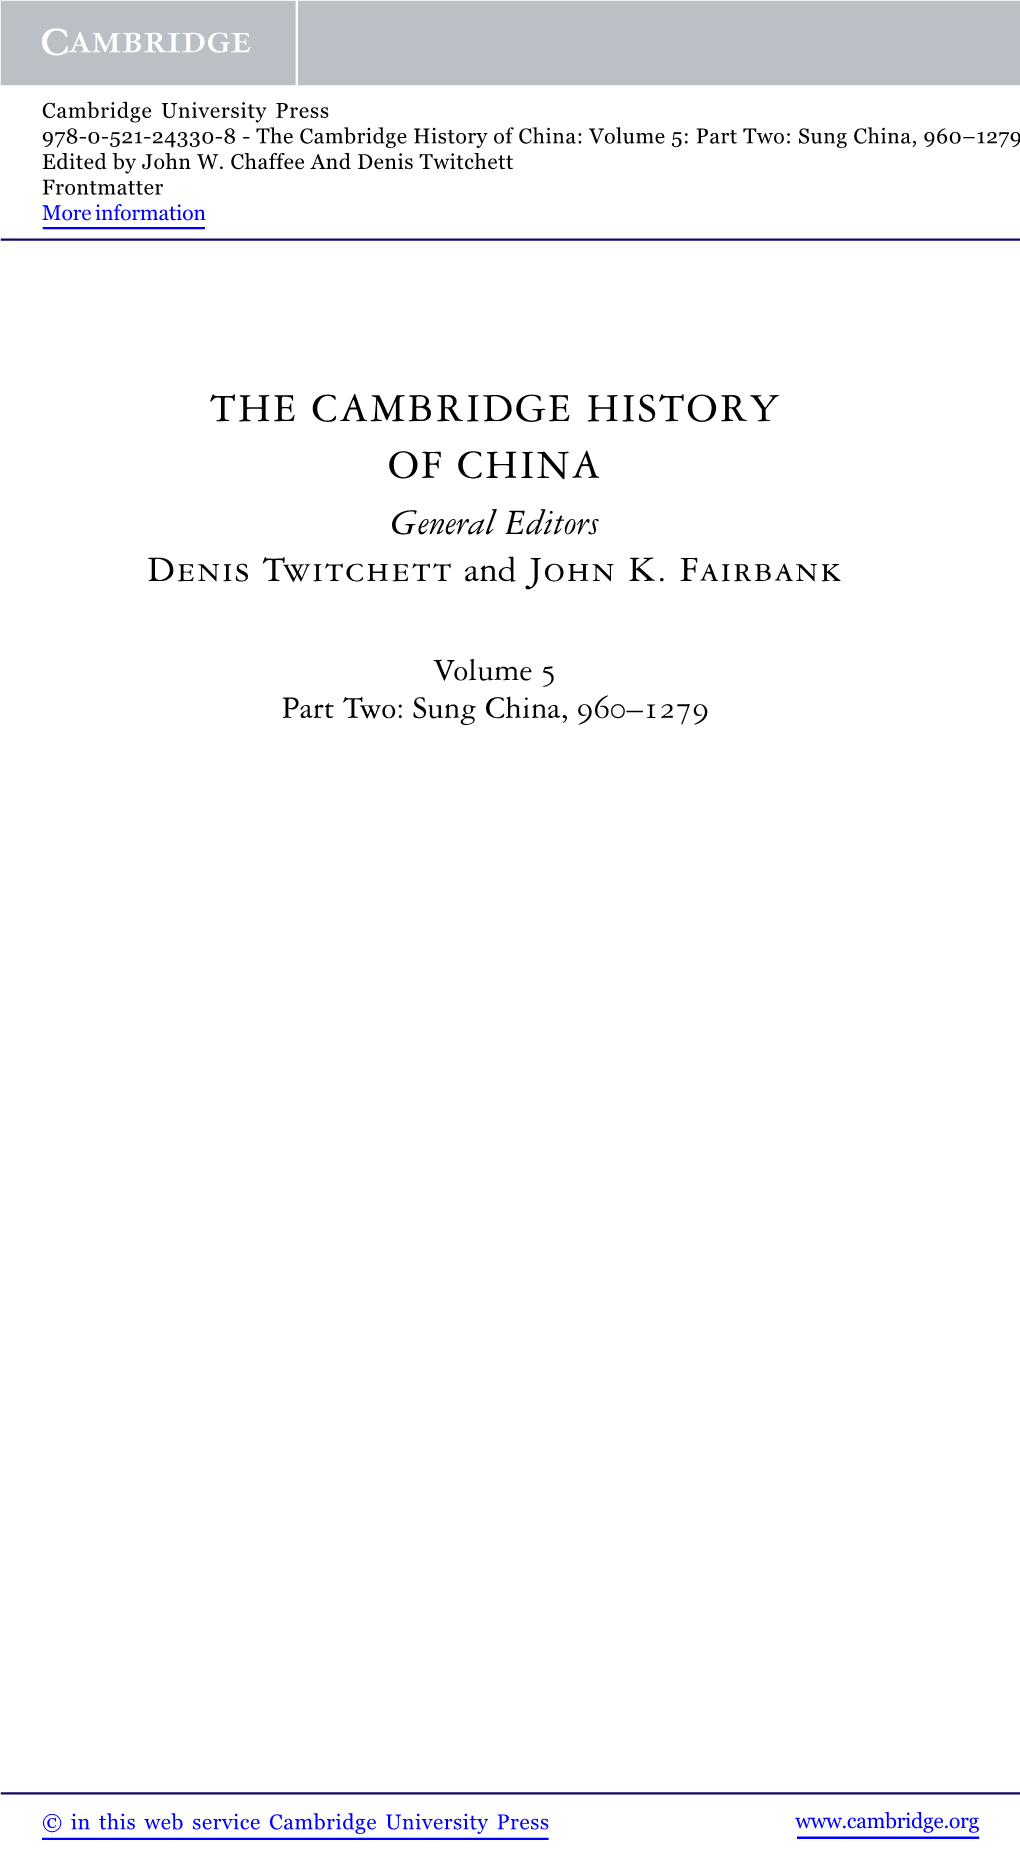 The Cambridge History of China: Volume 5: Part Two: Sung China, 960–1279 Edited by John W